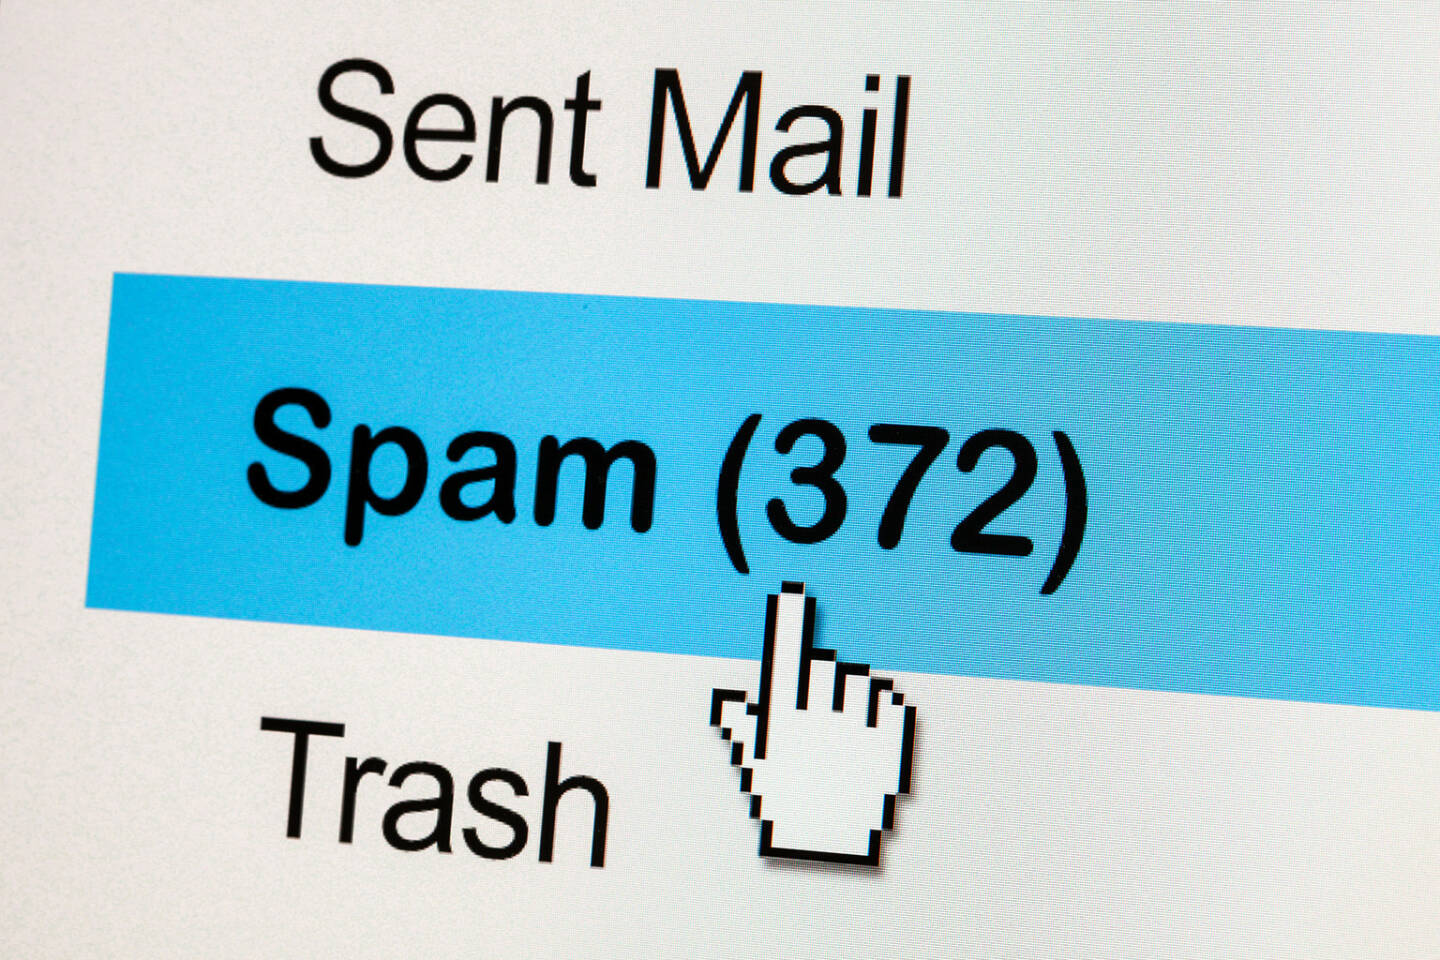 Spam, Mail, Trash, Sent, http://www.shutterstock.com/de/pic-172730753/stock-photo-computer-monitor-screen-concept-of-spam-email.html